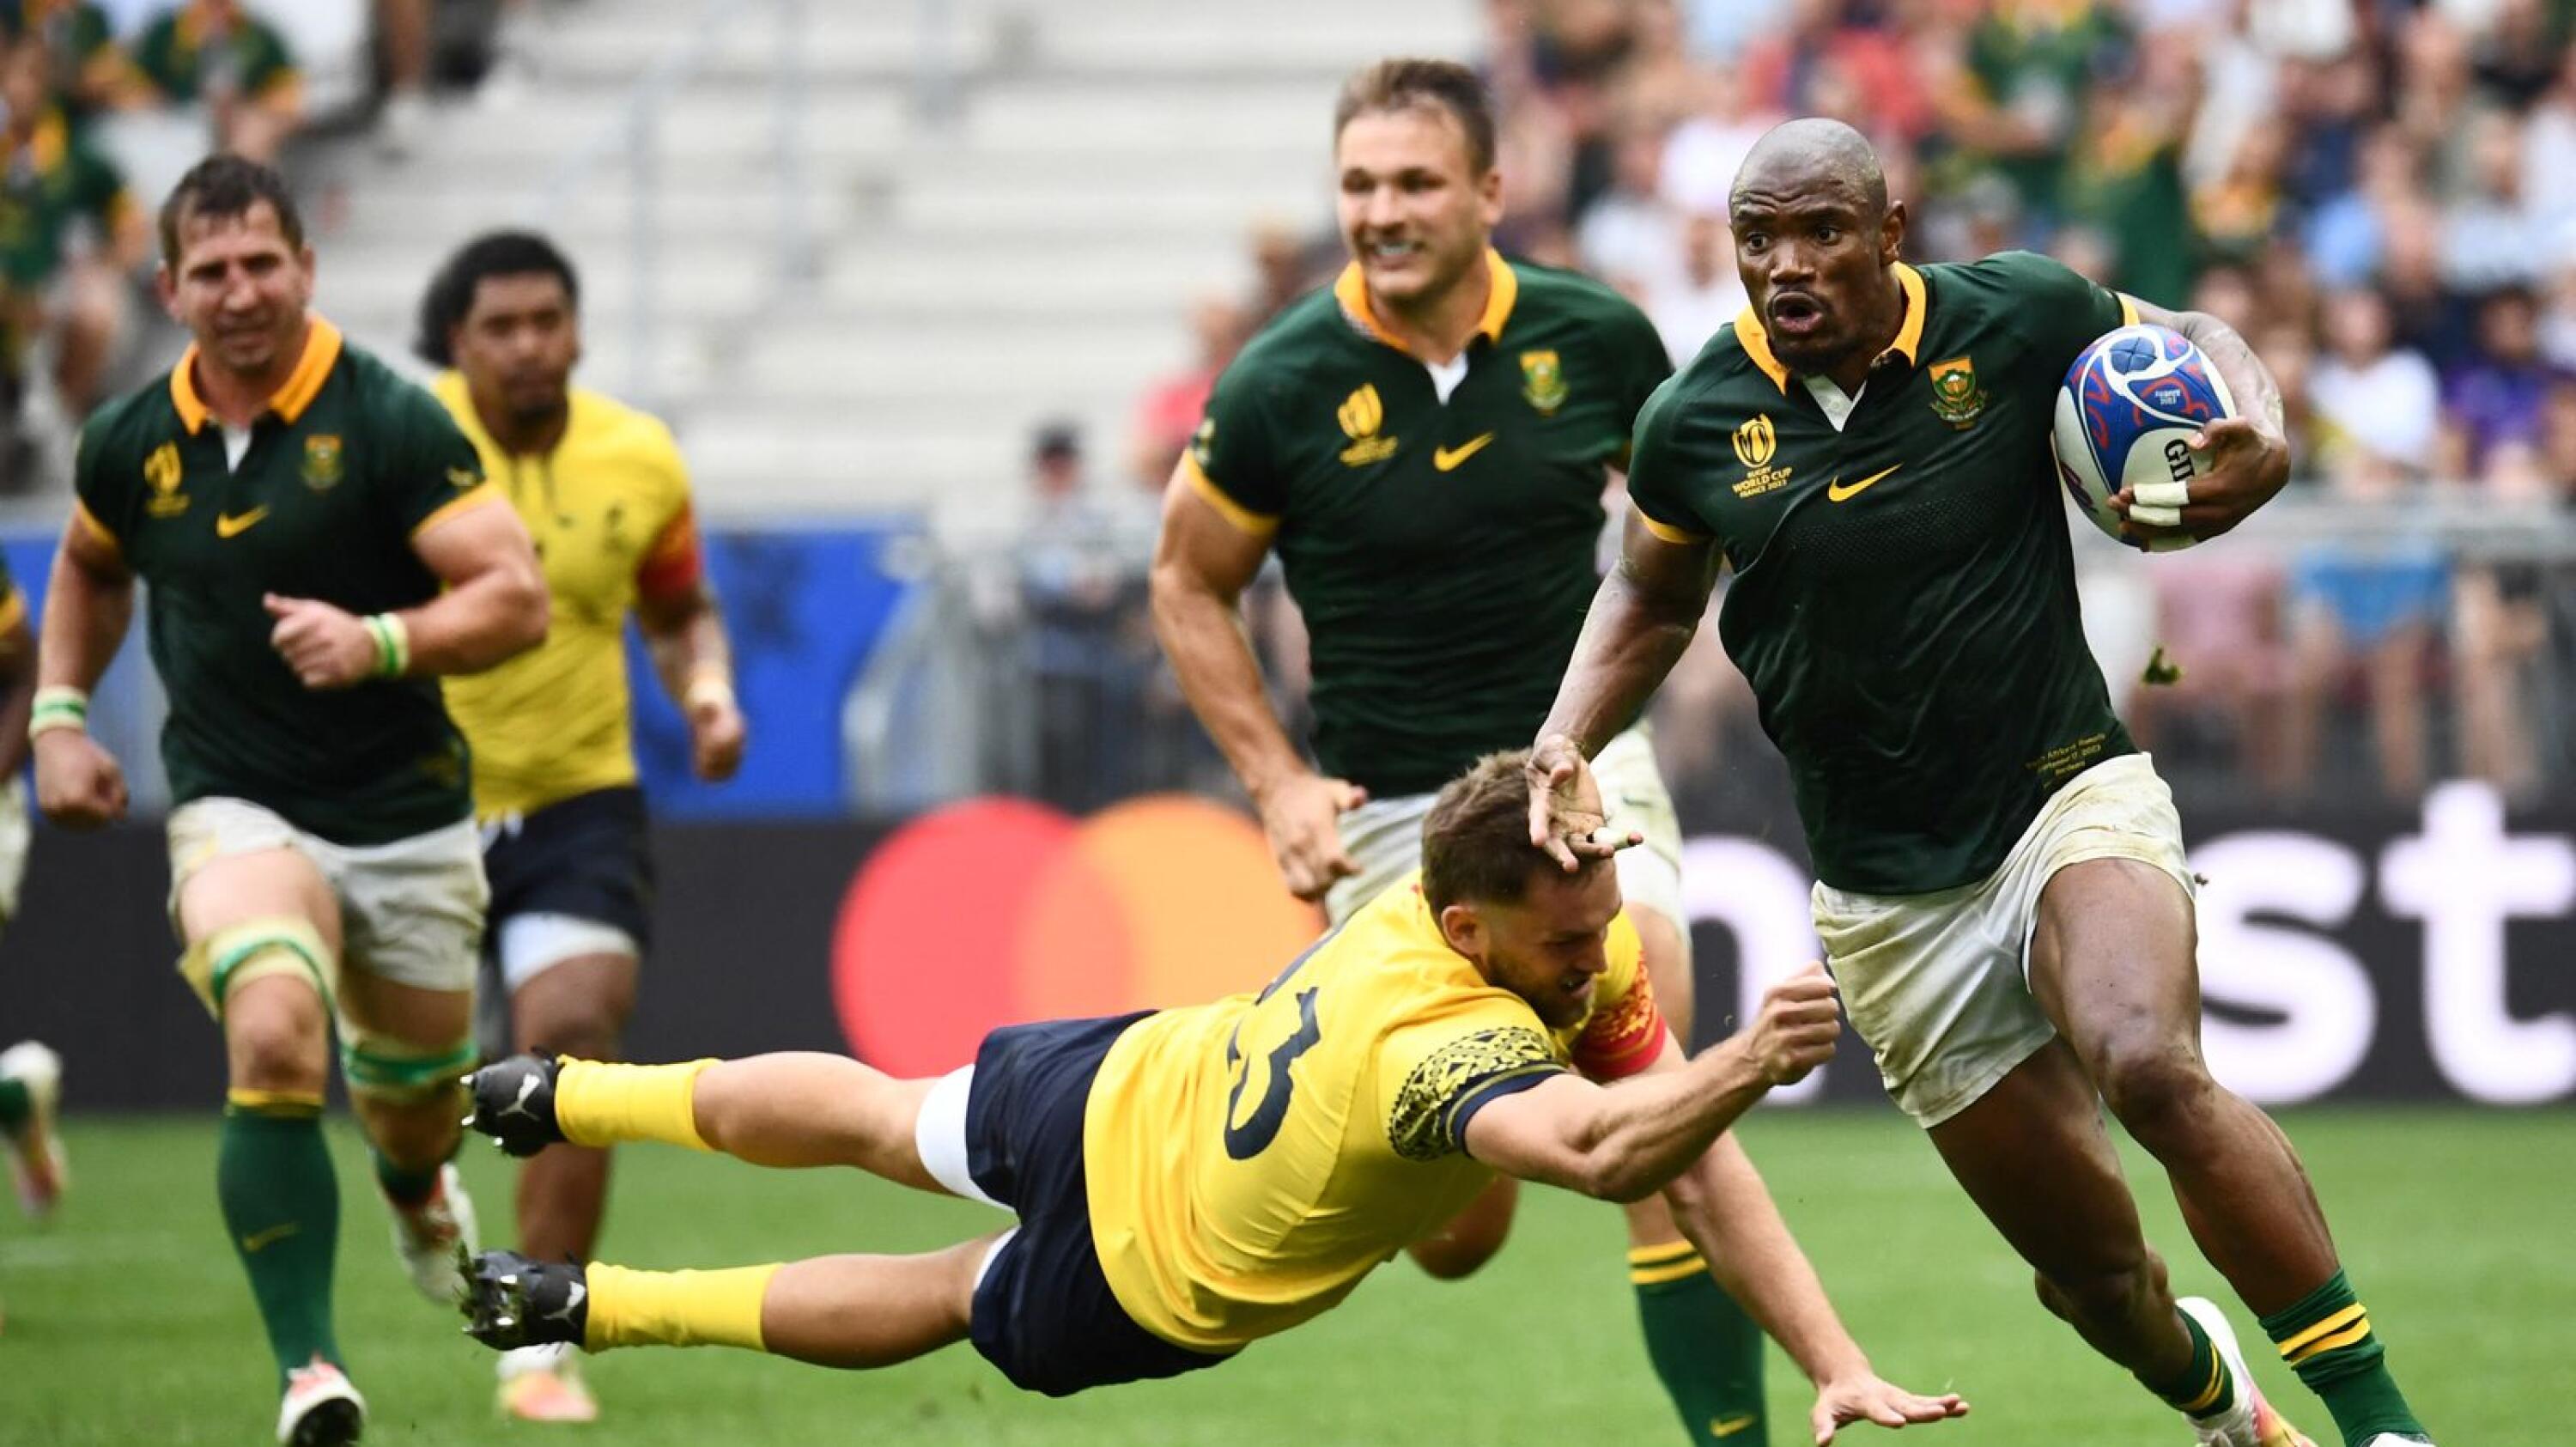 Springbok wing Makazole Mapimpi runs in to score the team's ninth try during their Rugby World Cup game against Romania